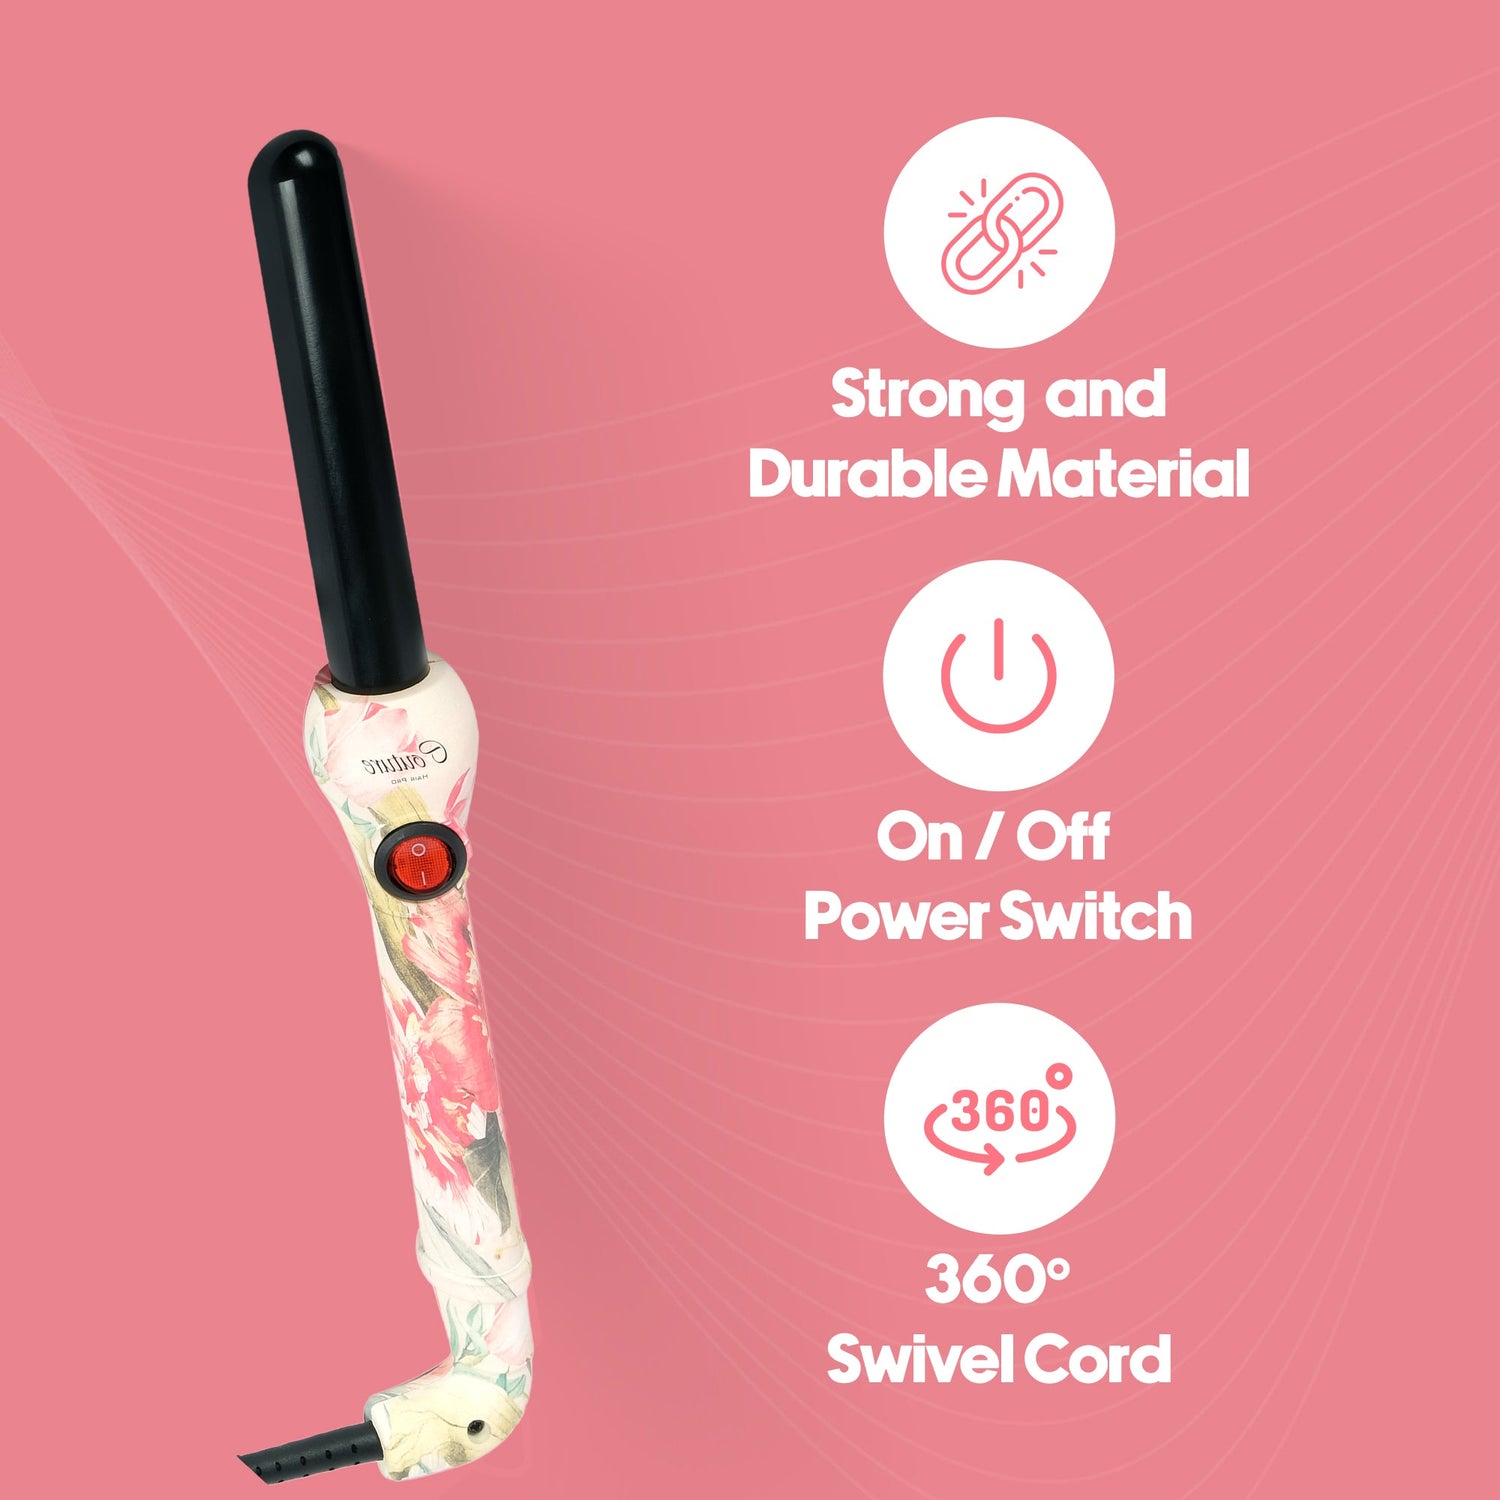 Couture Hair Pro Hair Curler 25 MM Beverly Hills Limited Edition - Spring Flowers - Couture Hair Pro